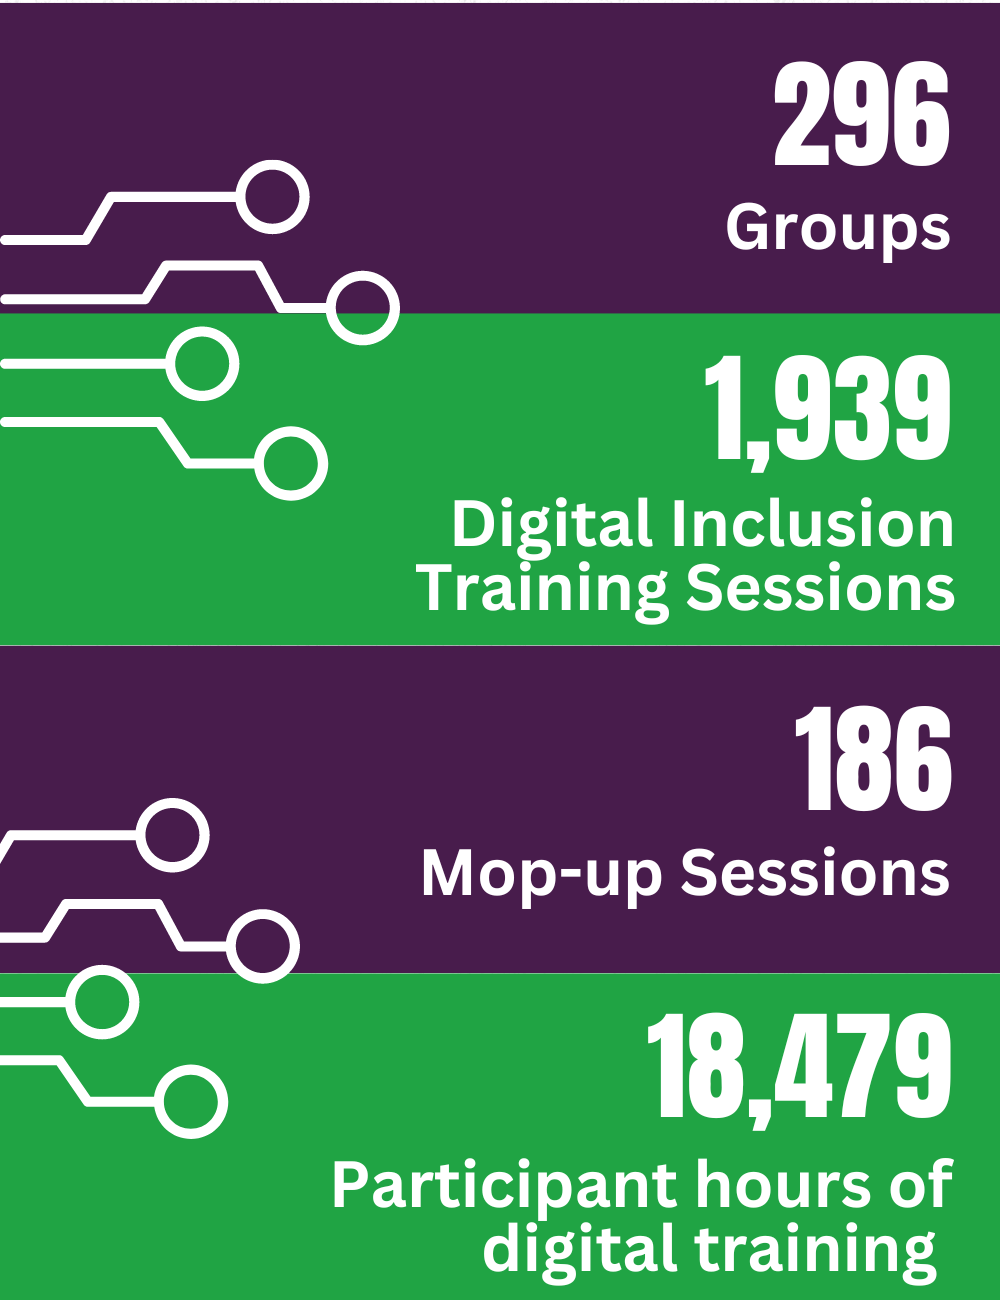 This diagram shows the numbers related to the Digital Inclusion Training.  These are 296 Groups, 1939 Digital Inclusion Sessions, 186 Mop-up Sessions and 18,479 Participant hours of digital inclusion training.  